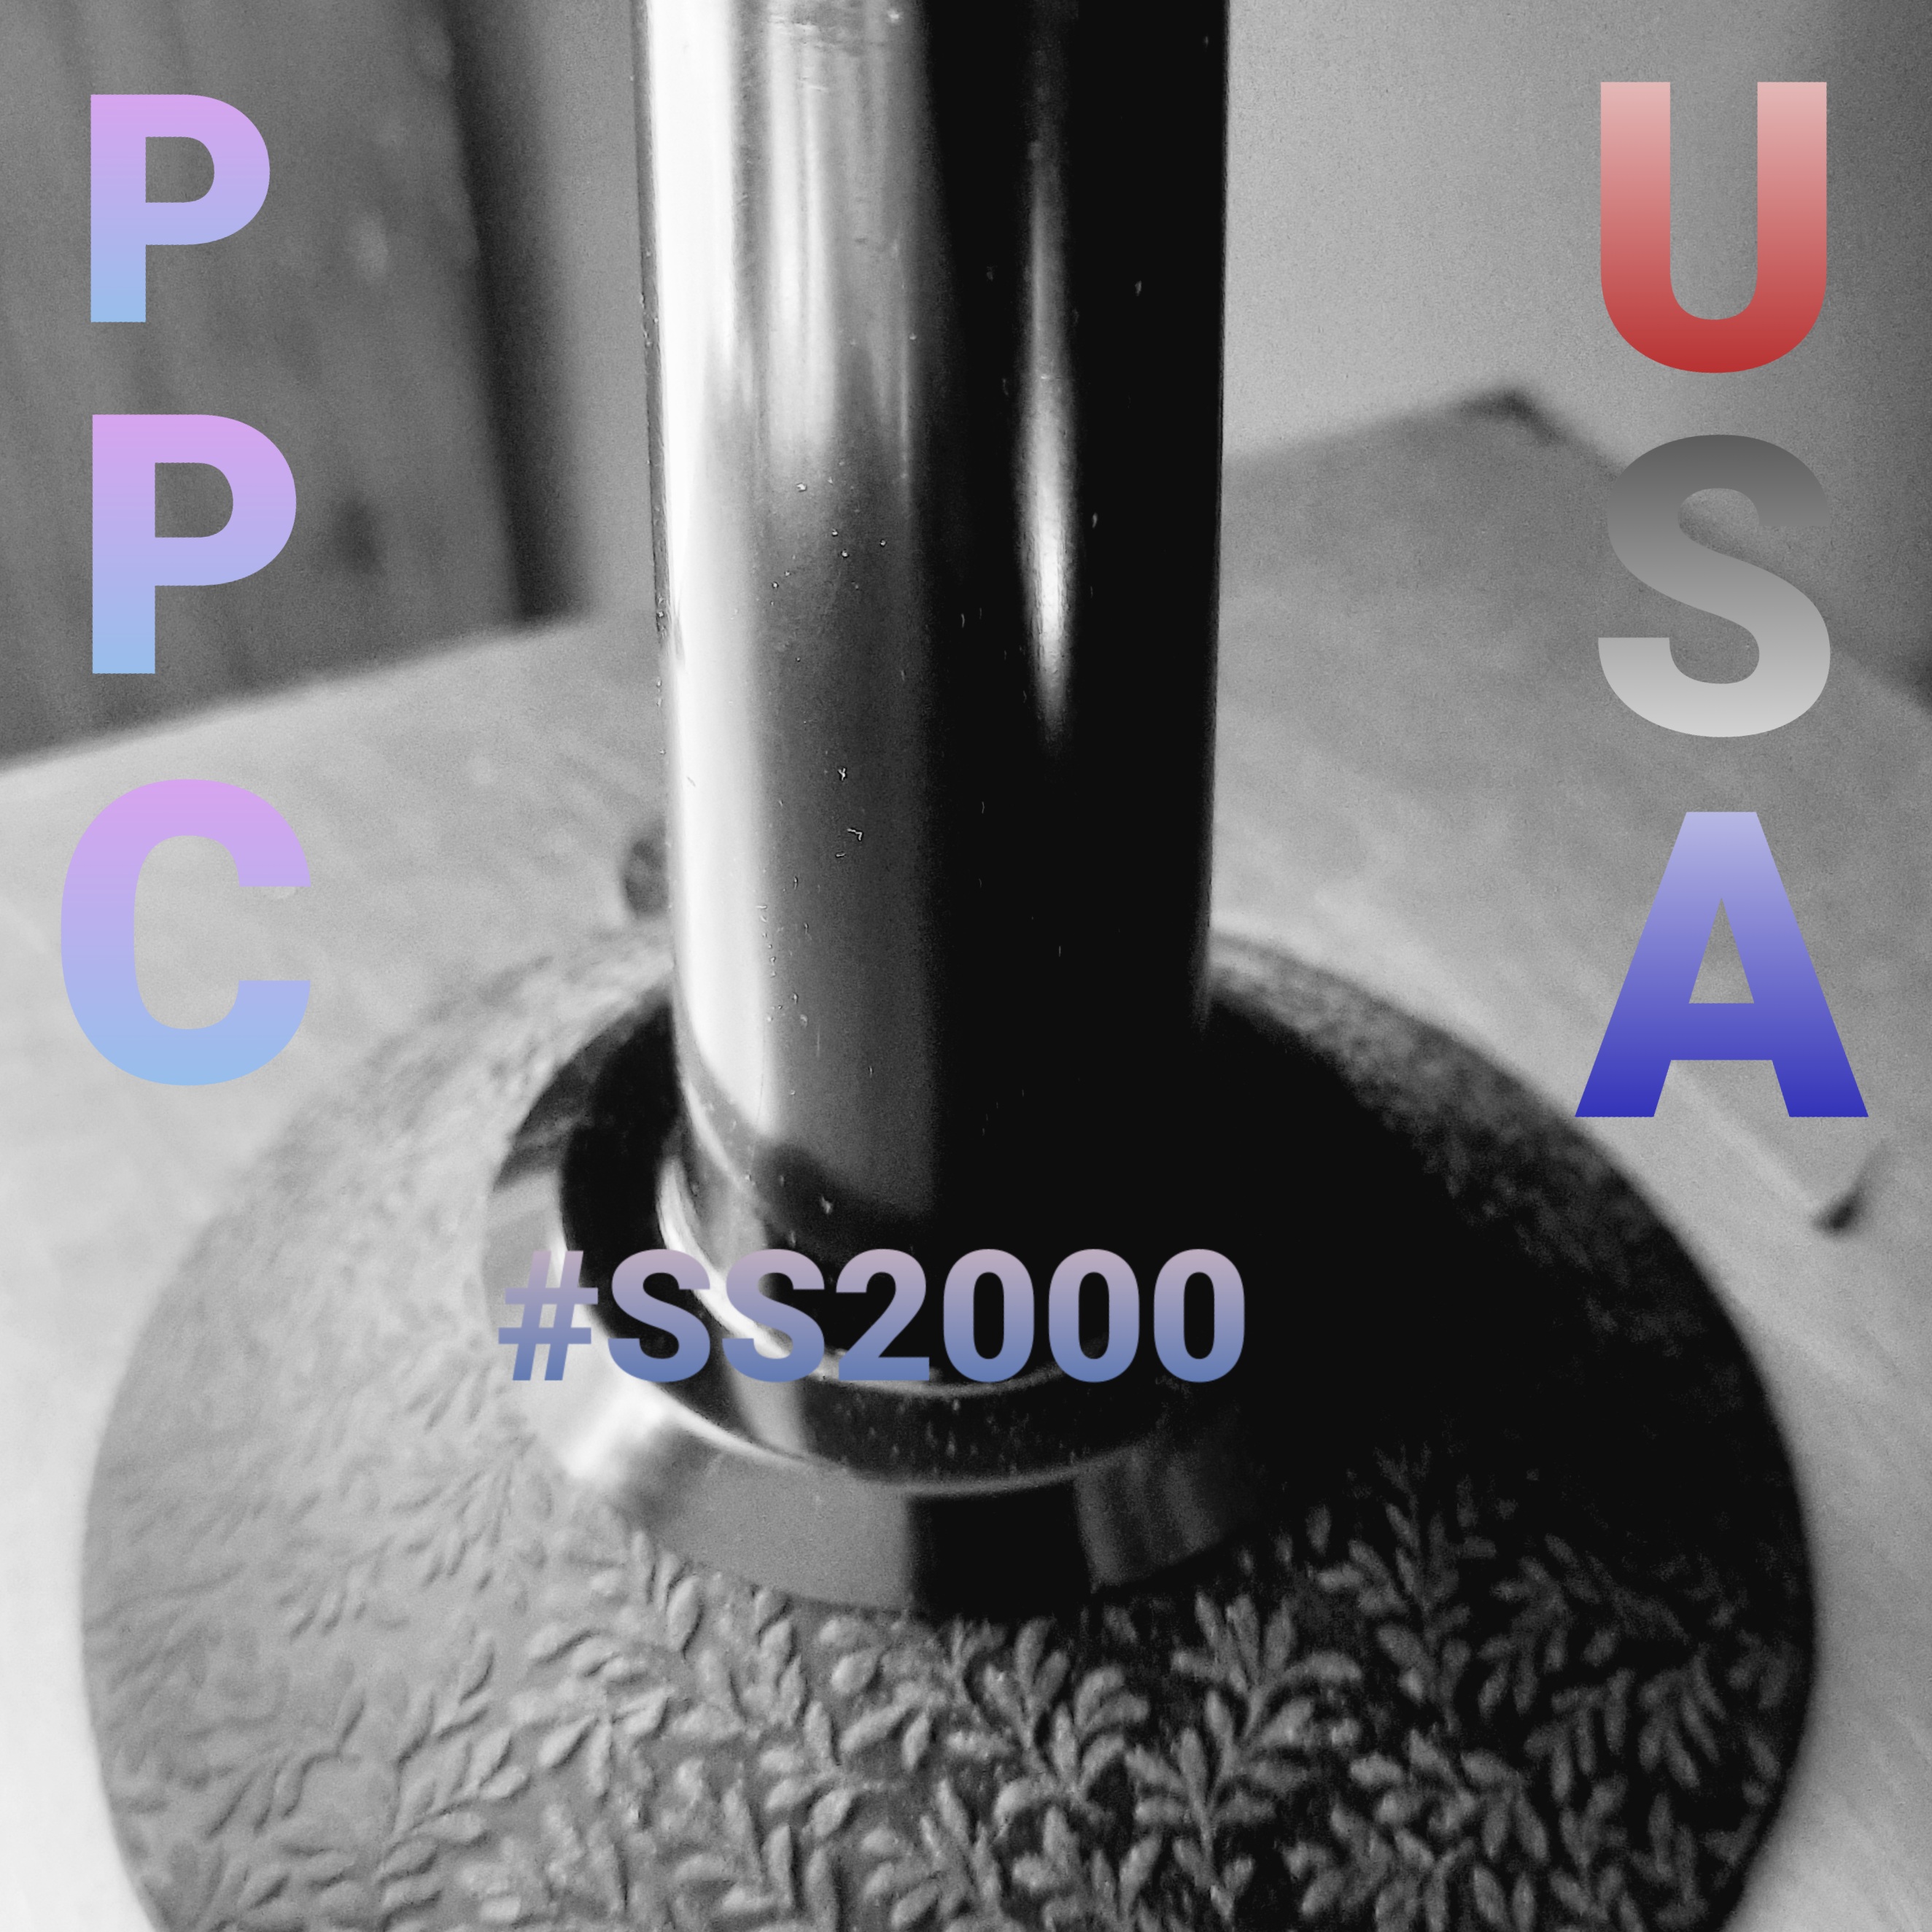 #SS2000 FOAM HEAD PLASTIC/RUBBER 3.5"H SUCTION STAND BY POLLY PRODUCTS. MADE IN THE USA QUALITY